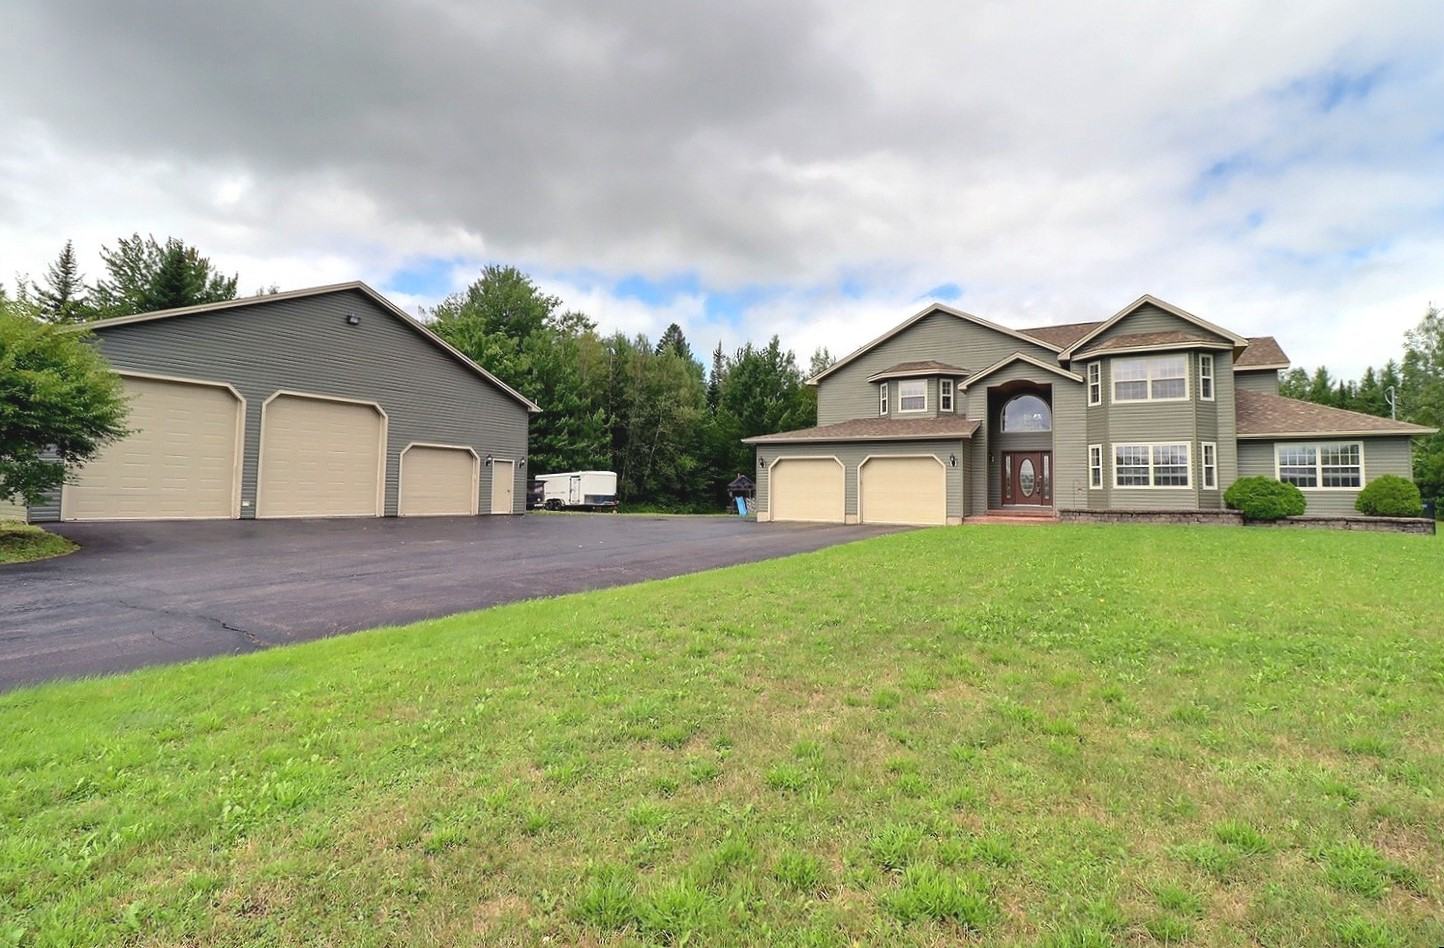 66 Synton Rd, Colpitts Settlement, NB E4J 2Y2, Canada